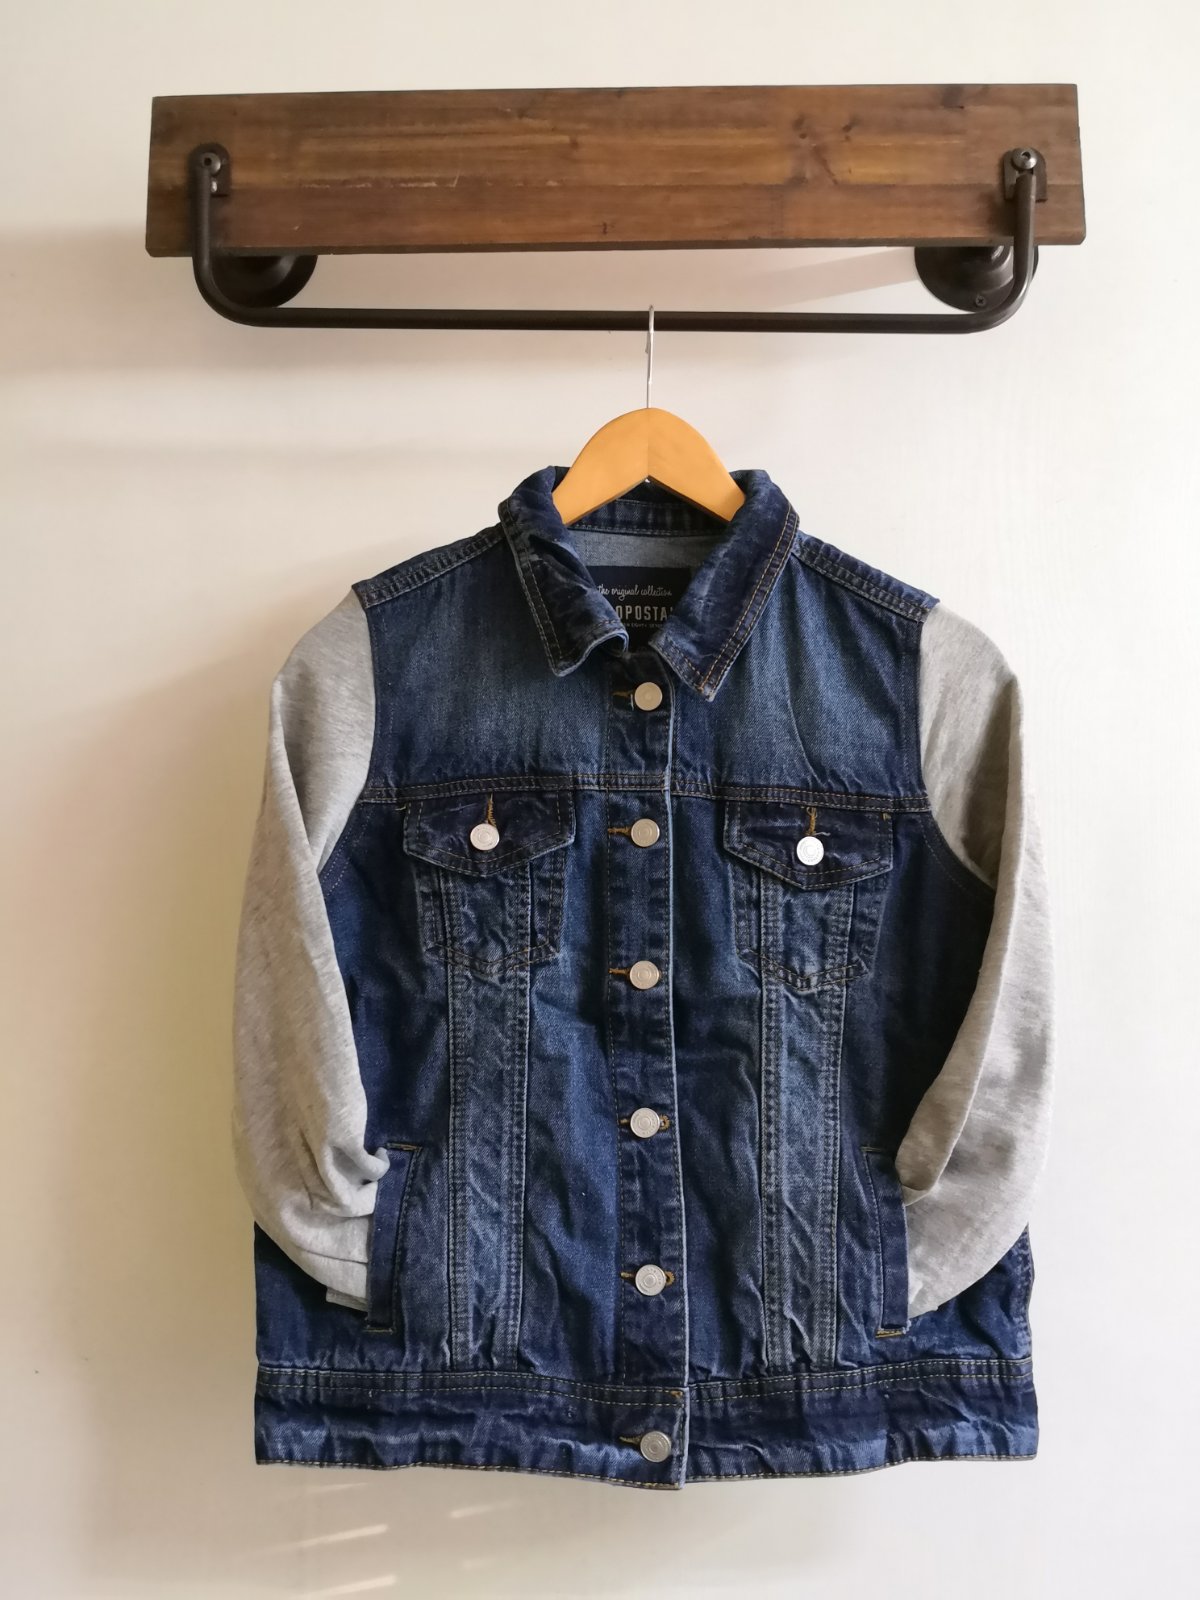 jean jacket with cotton sleeves